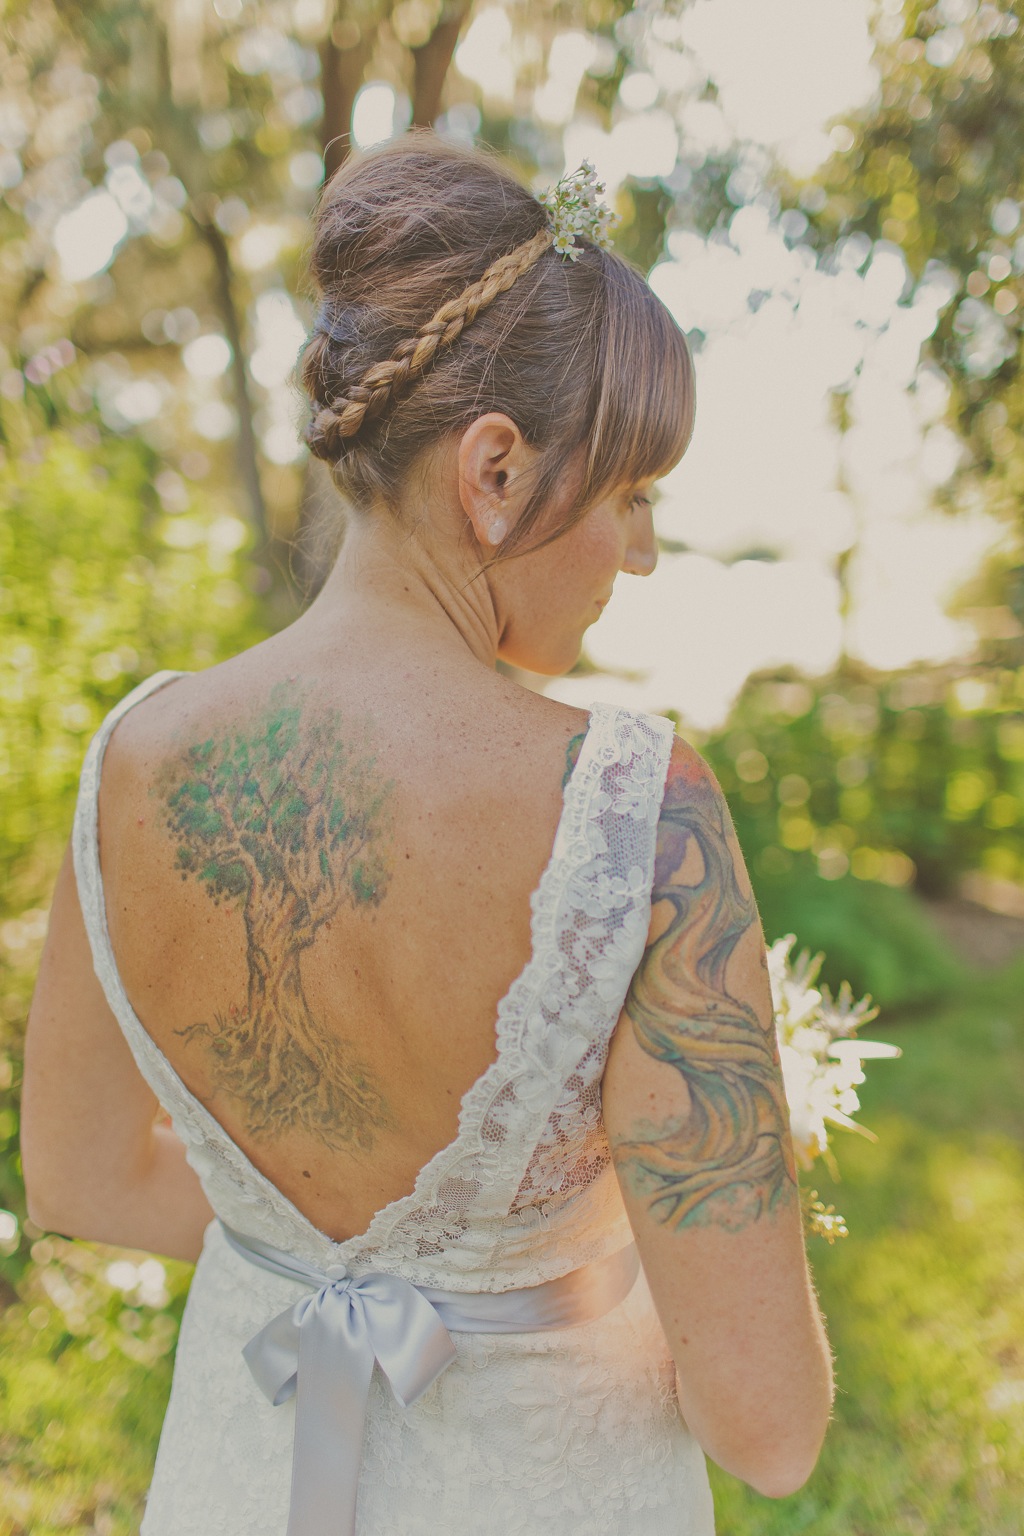 Lace Wedding Dress with Open Back - Rustic Tattoo Bride